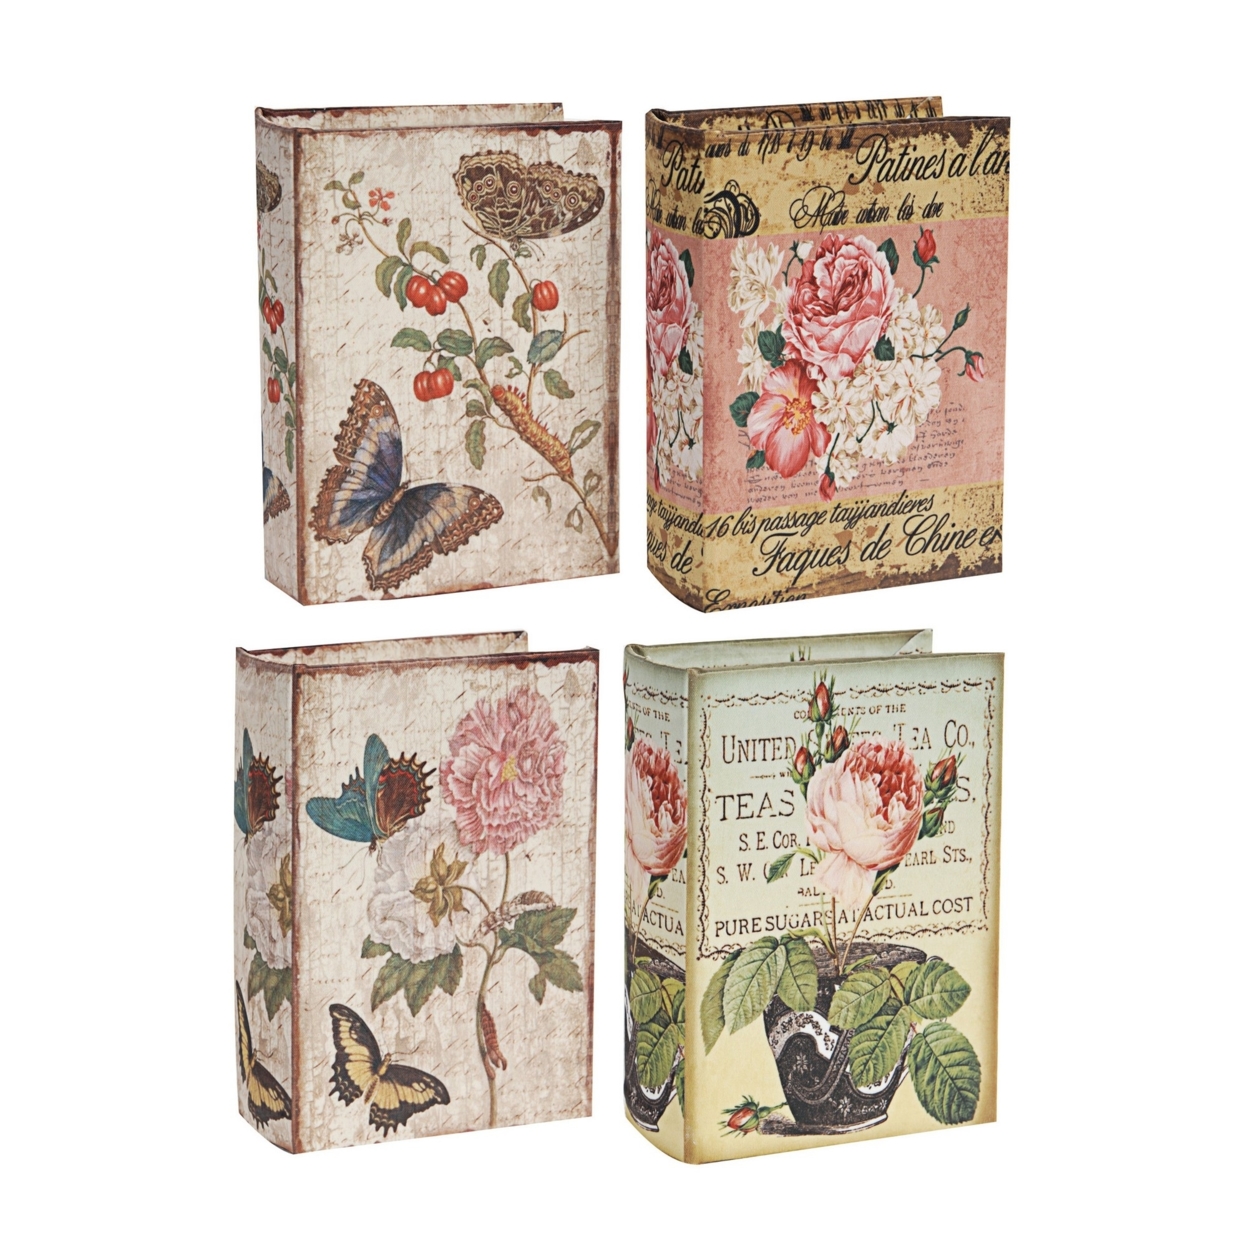 Anya Set Of 4 Artisanal Boxes For Accessories, Book Inspired Look, Floral- Saltoro Sherpi